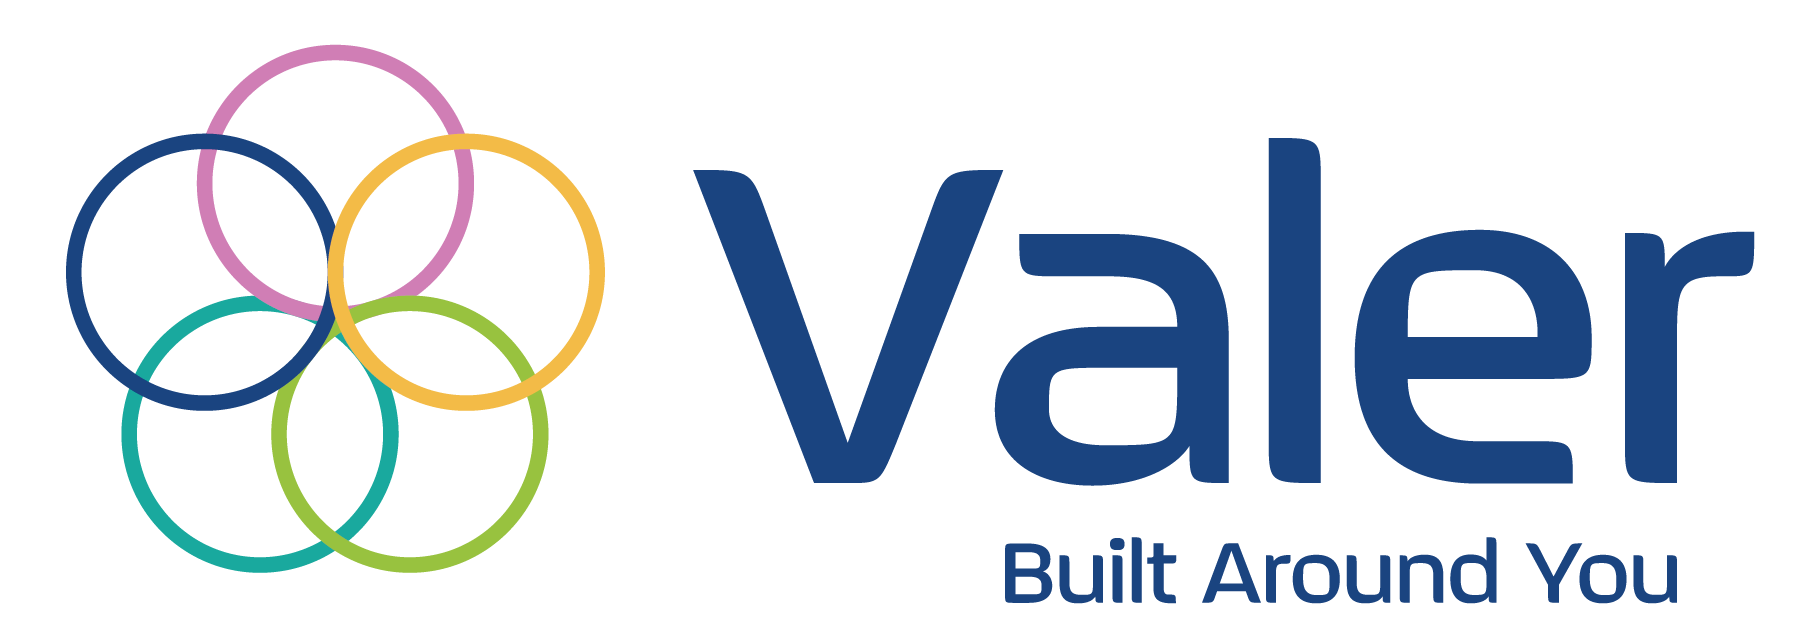  Valer’s technology speeds and simplifies prior authorization and referral management by automating submissions, status checking, verification, reporting, and EHR synchronization across all your healthcare settings, specialties, and payers from one platform and portal.